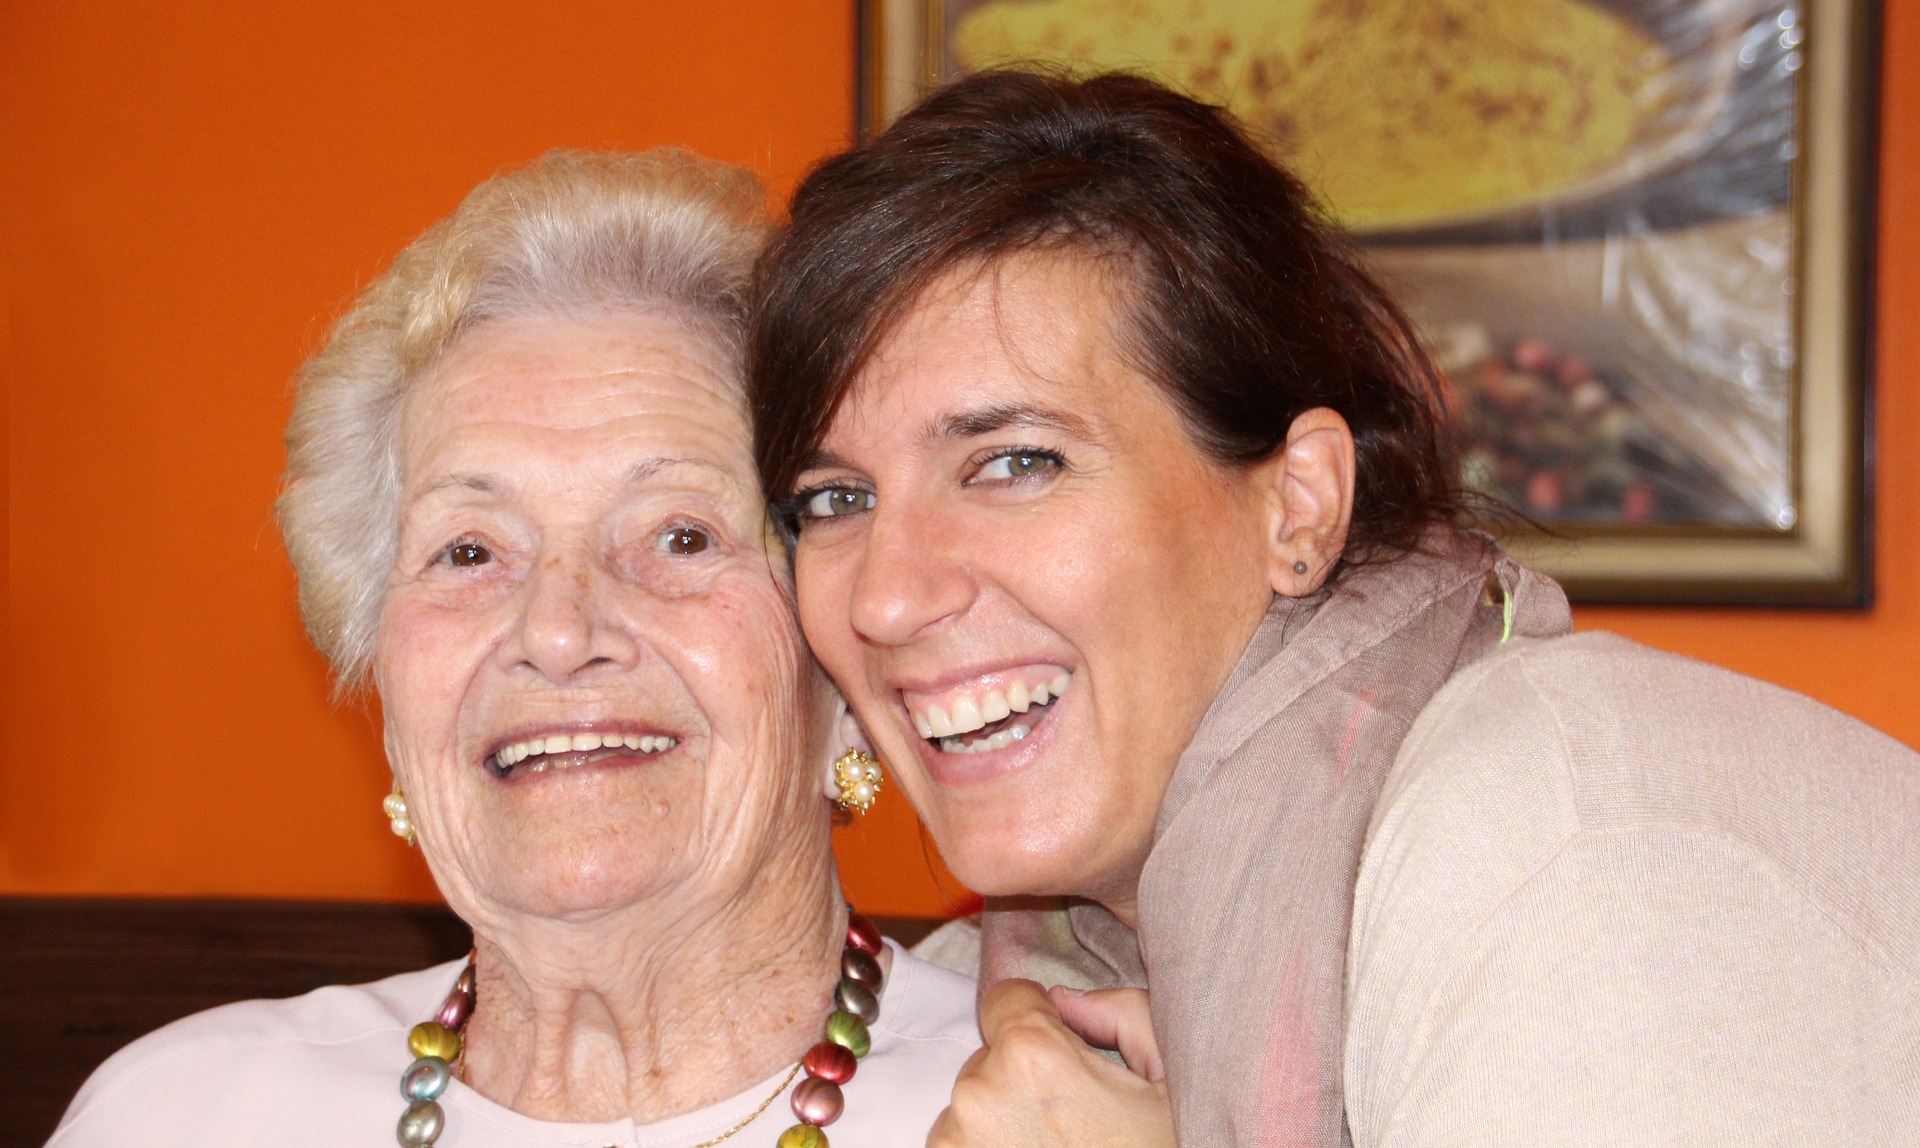 Older woman and her granddaughter smiling while they pose for a picture.